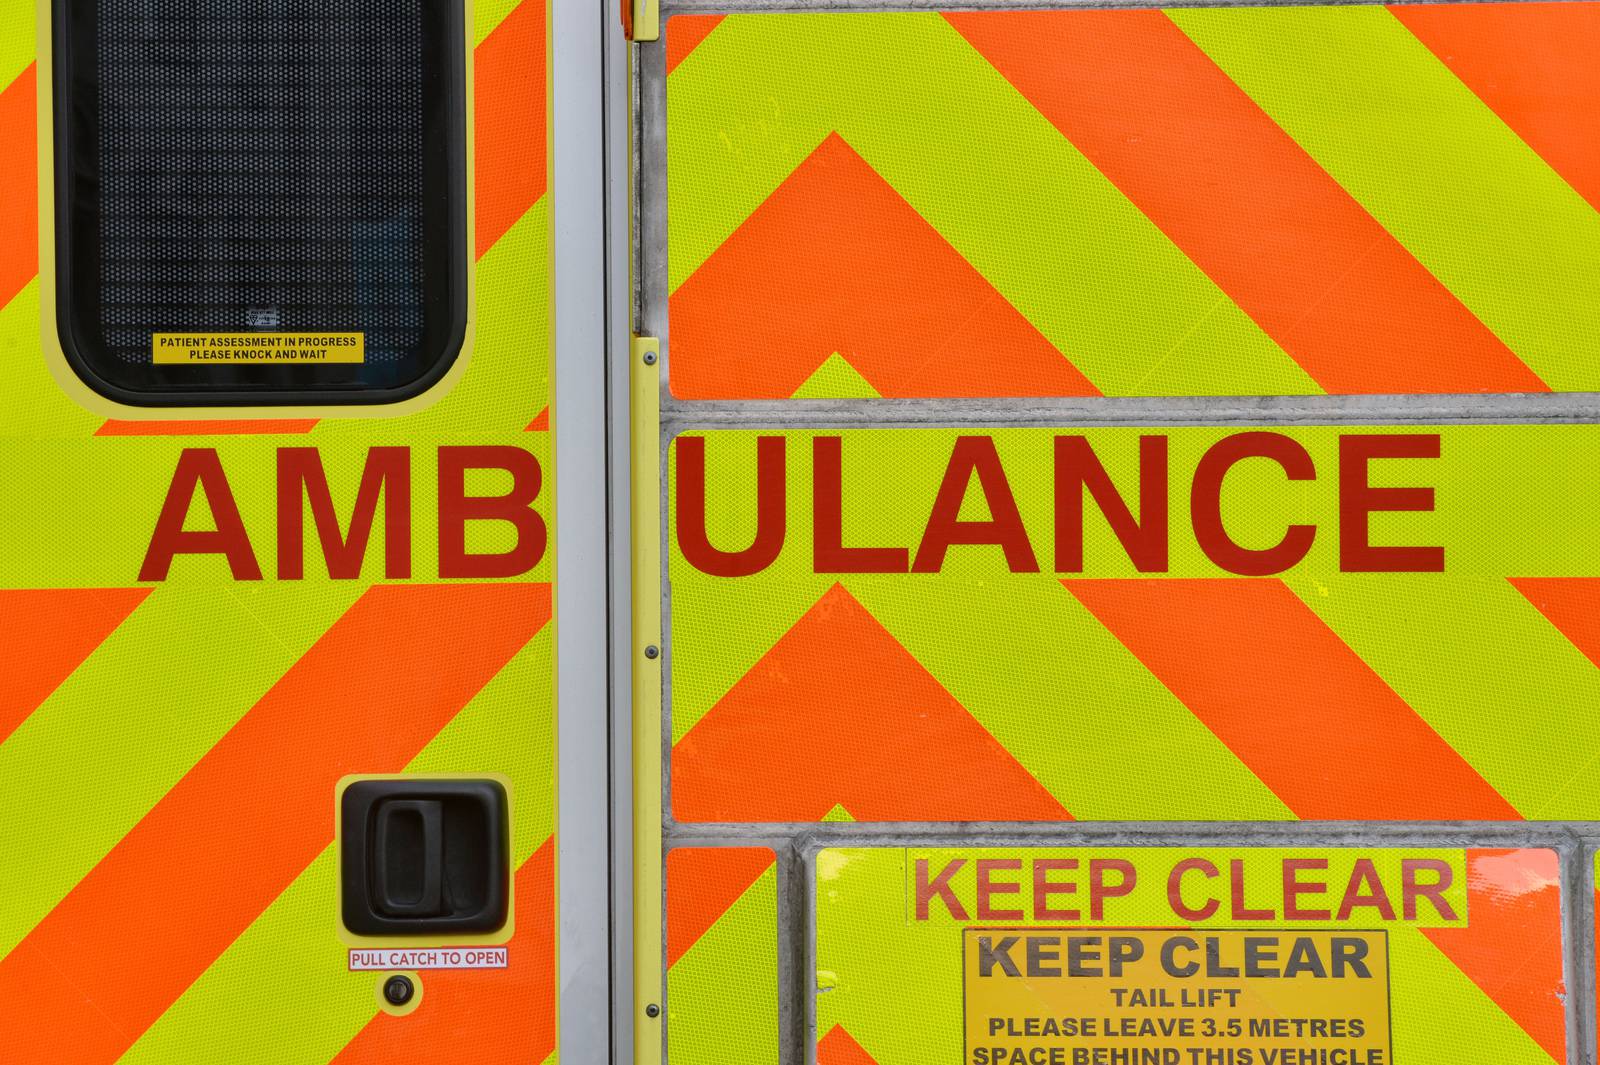 21/01/2015 - NEWS -  Generic stock pictures of an Ambulance from the National Ambulance Service.search words Medicine, medical, hospital, A&E, Accident and Emergency,  
Photograph: Alan Betson / The Irish Times
AMBULANCE  ... STOCK..... FILE...